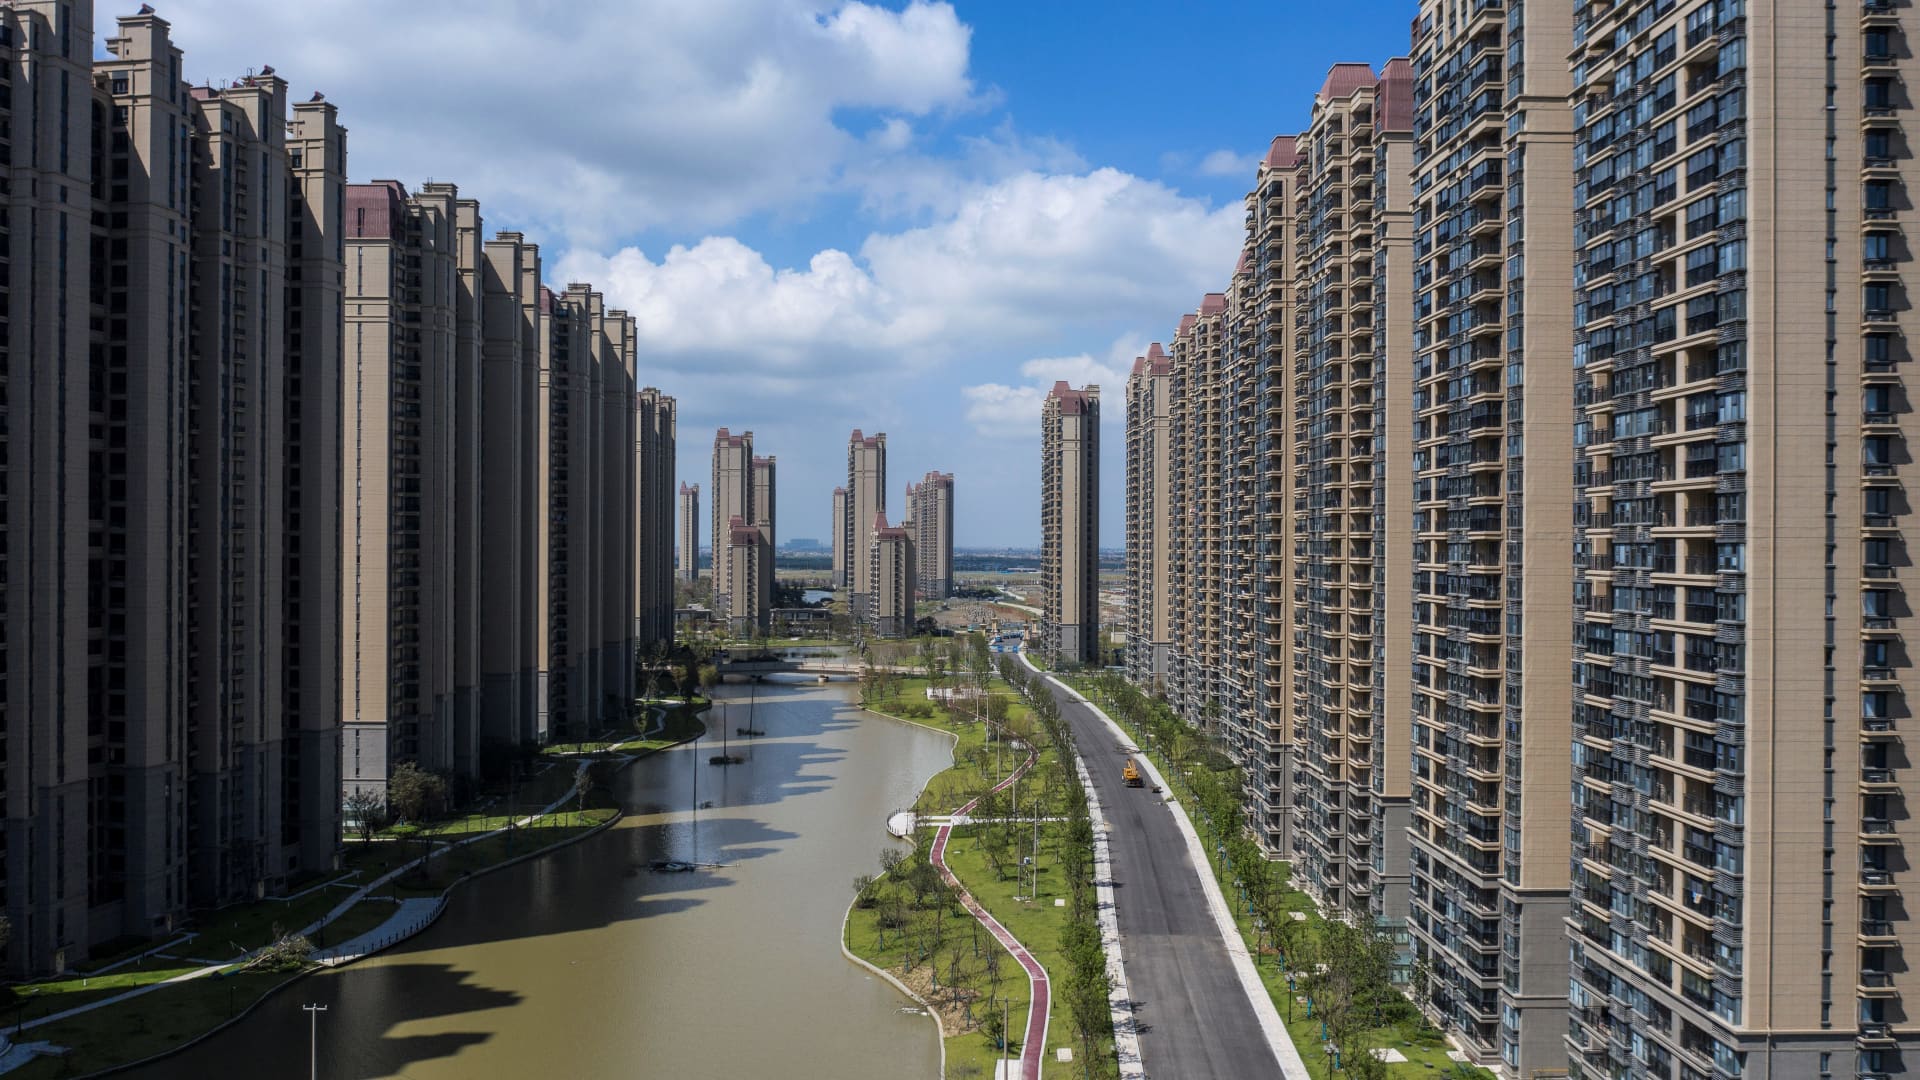 Apartment buildings at China Evergrande Group's Life in Venice real estate and tourism development in Qidong, Jiangsu province, China, on Tuesday, Sept. 21, 2021.